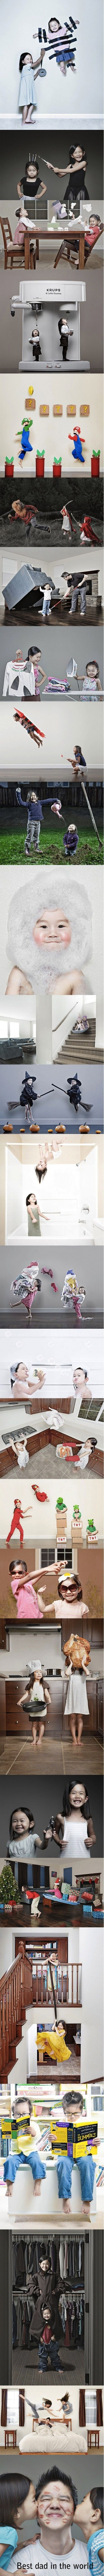 This is so cute and creative. I want to do this when I have kids